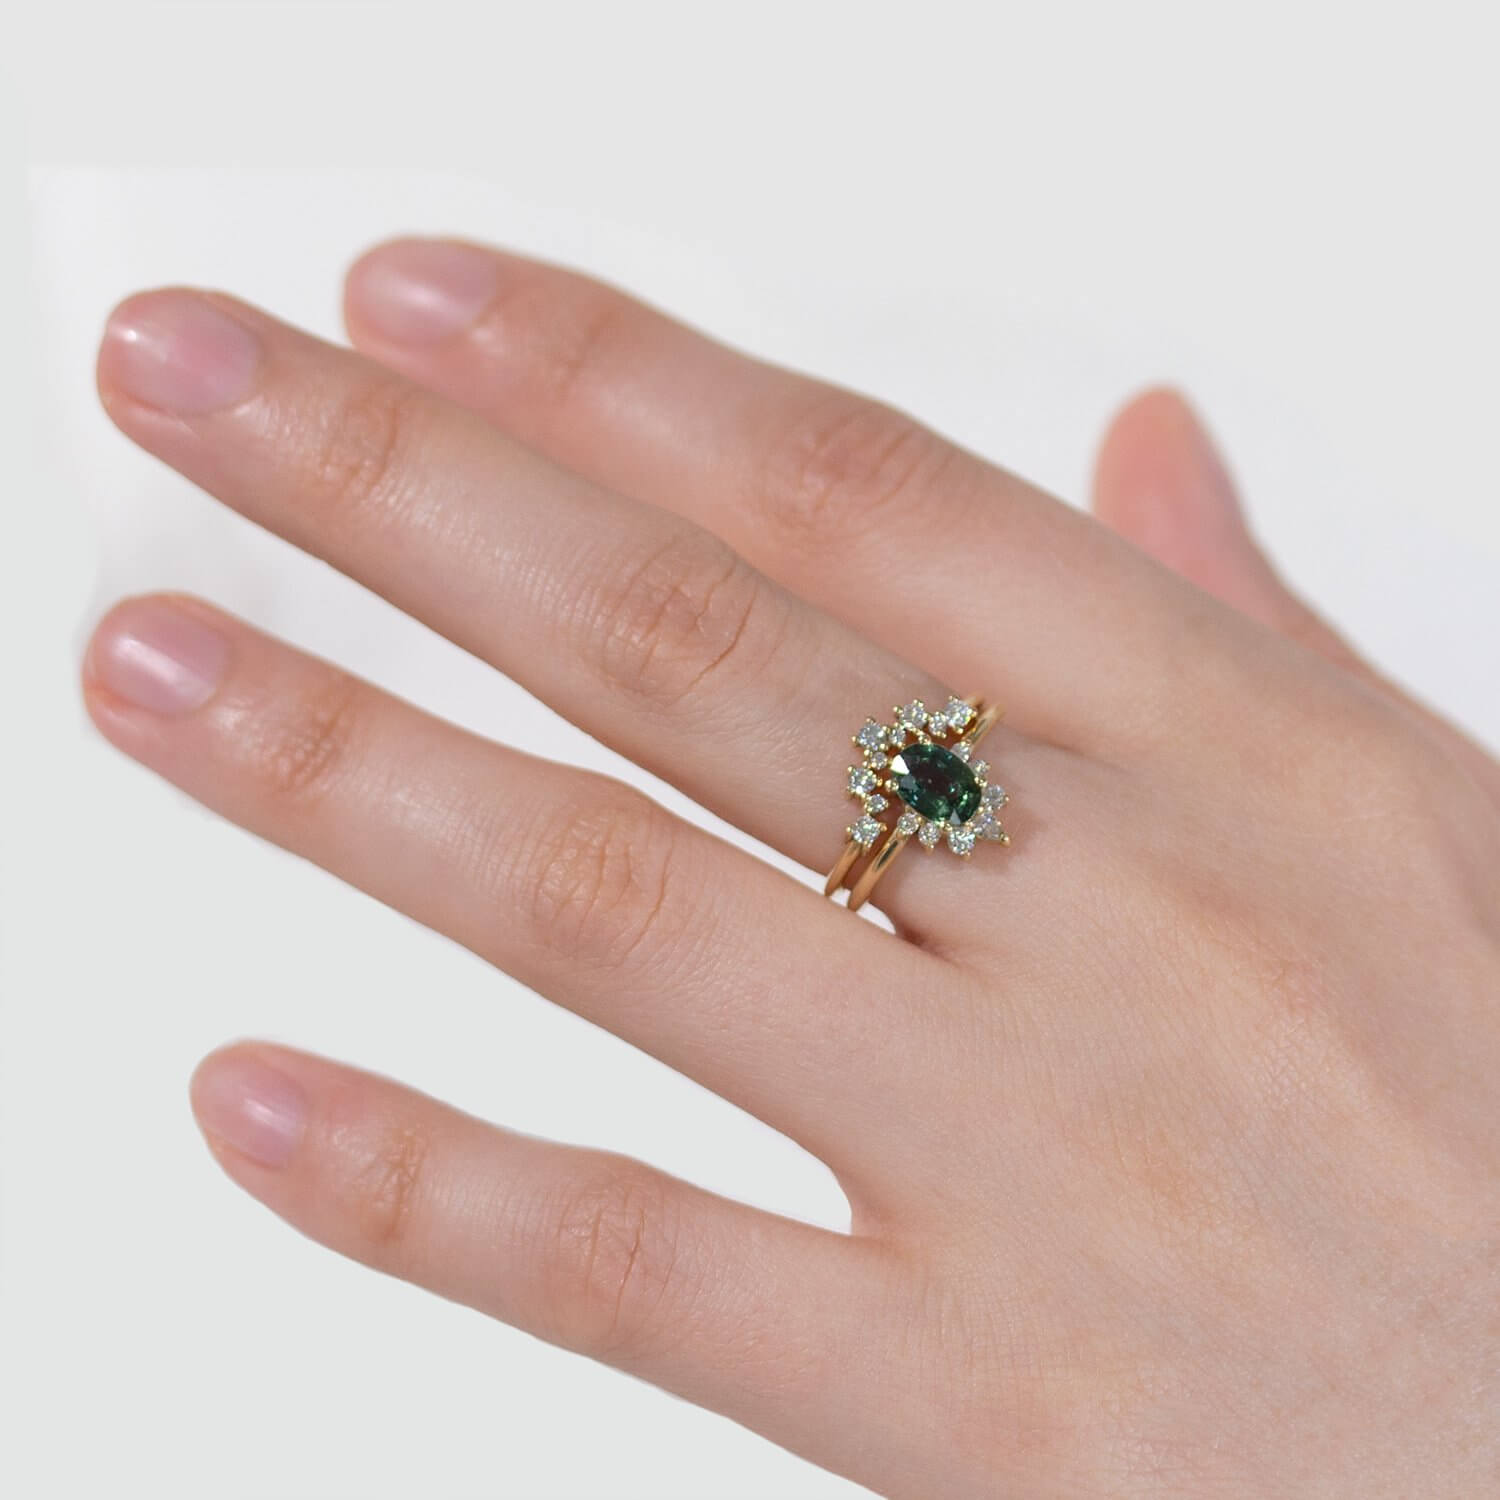 The Mira 1.7 CT Marquise Yellow Green Sapphire Ring – Lavender Creek Gems